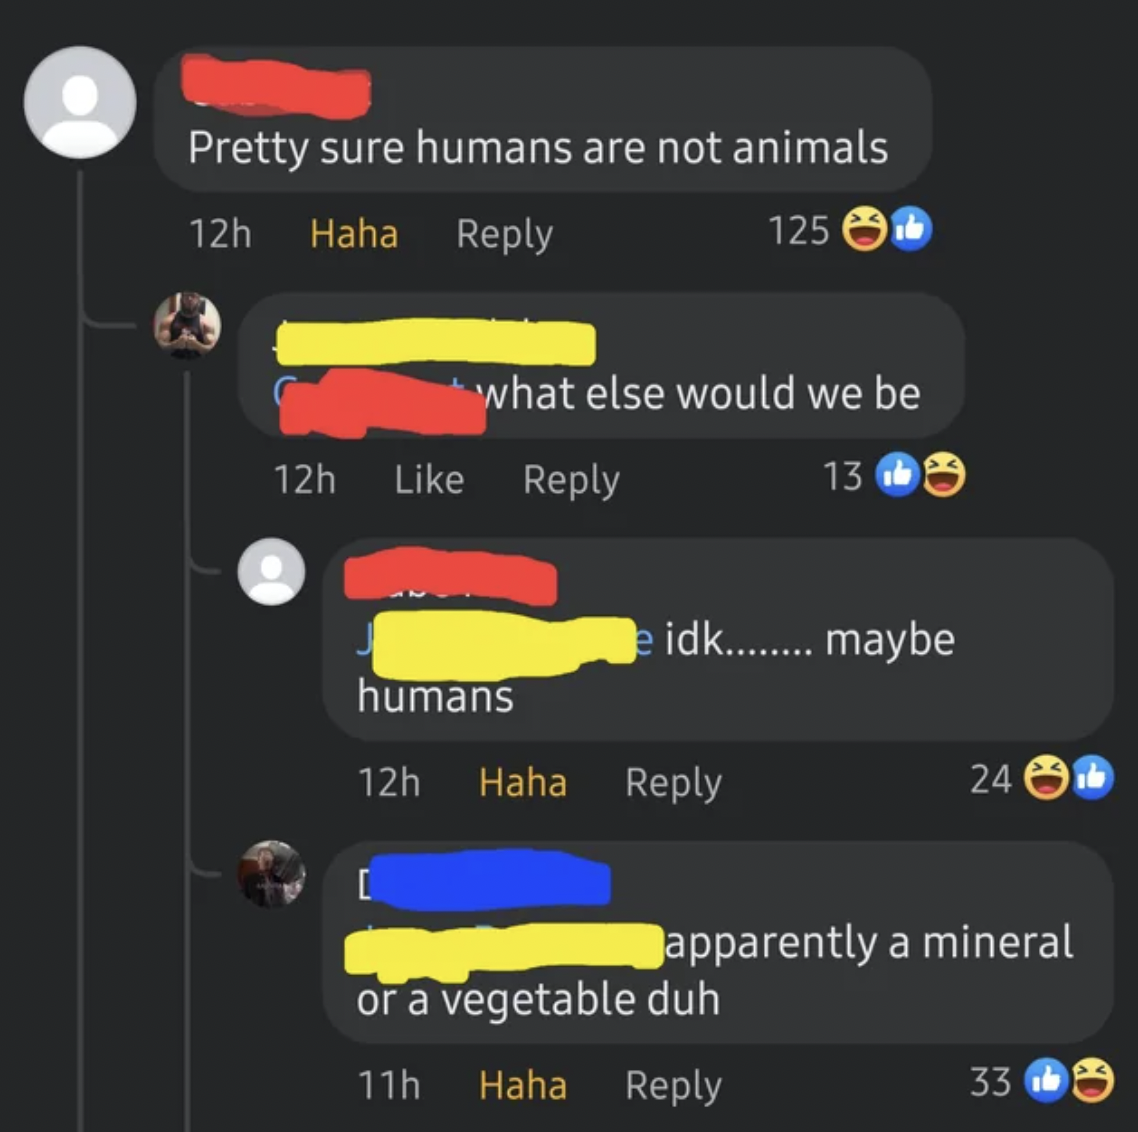 screenshot - Pretty sure humans are not animals  what else would we be 13 12h e idk........ maybe humans 12h Haha 24 apparently a mineral or a vegetable duh 11h Haha 33